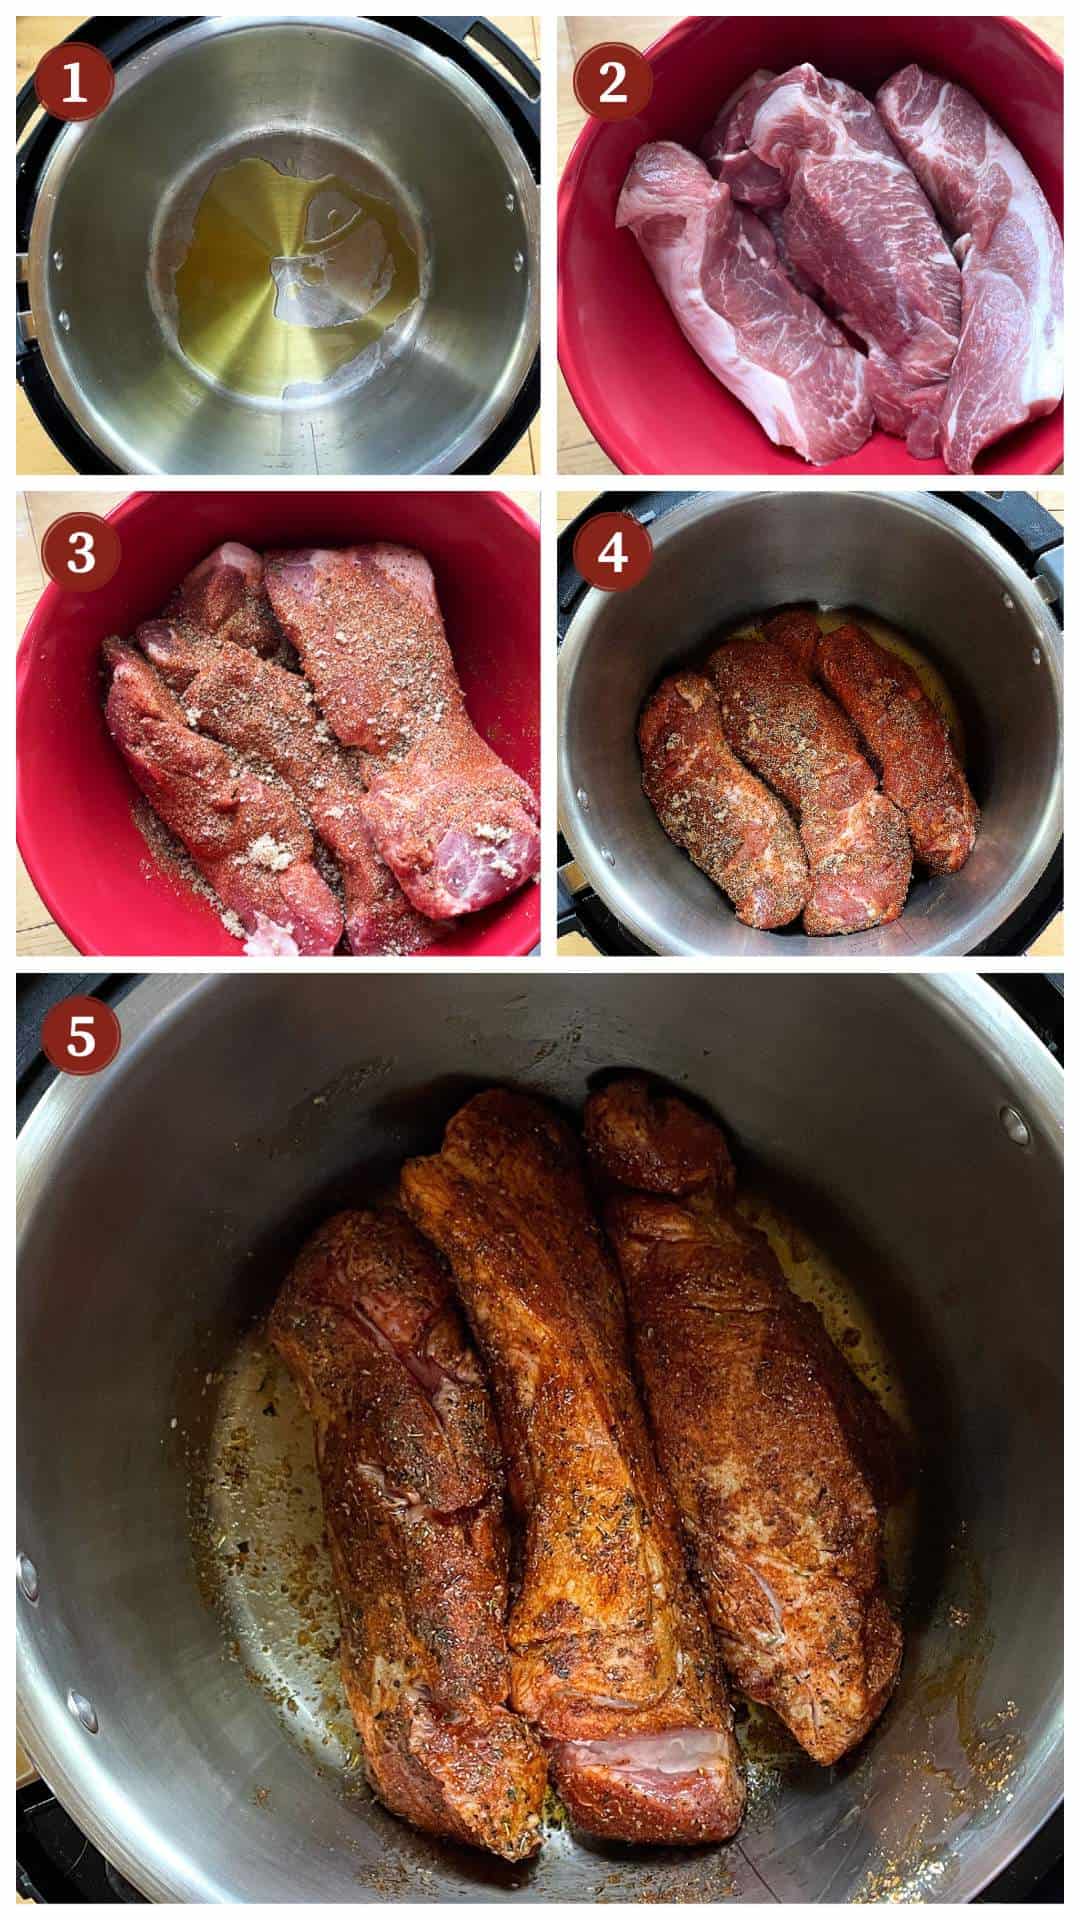 A collage of images showing how to make country style ribs in an Instant Pot, steps 1 - 5.